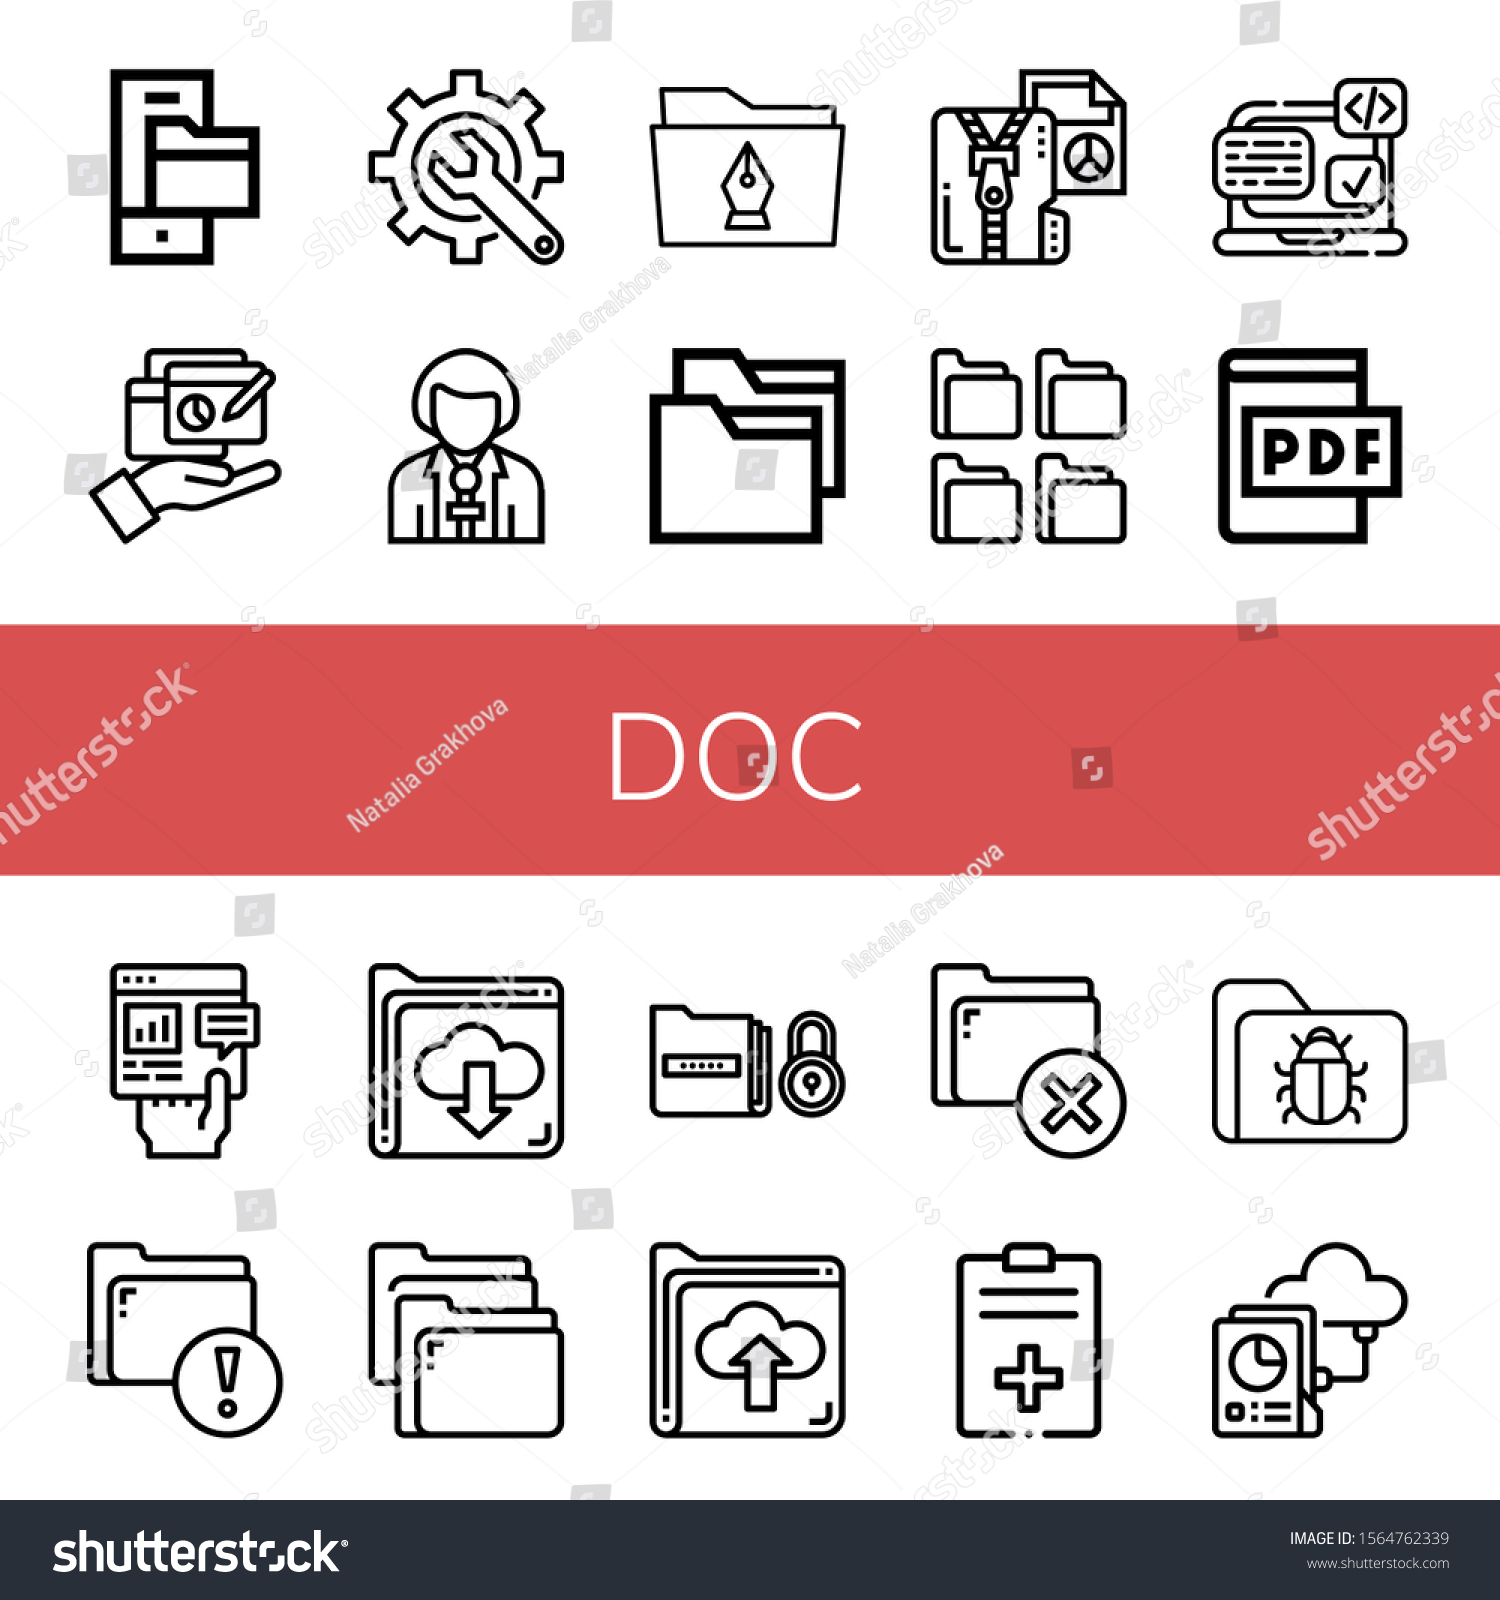 SVG of doc simple icons set. Contains such icons as Folder, Report, Content, Reporter, Compressed file, Folders, Svg, Pdf file, can be used for web, mobile and logo svg